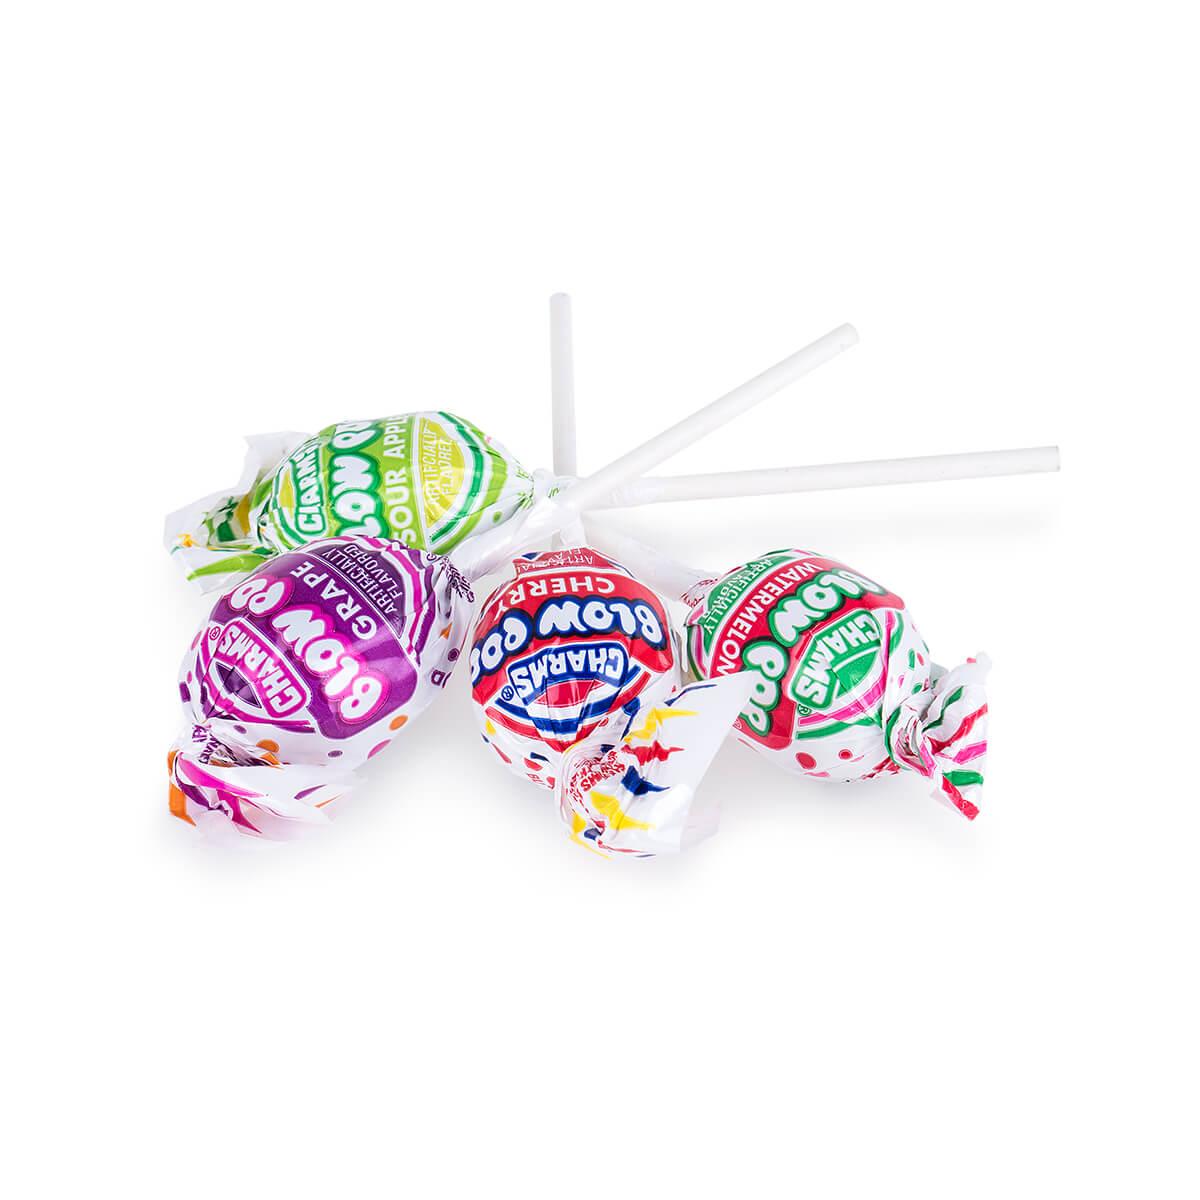  Charms Blow Pop Candy - 1 Lb.